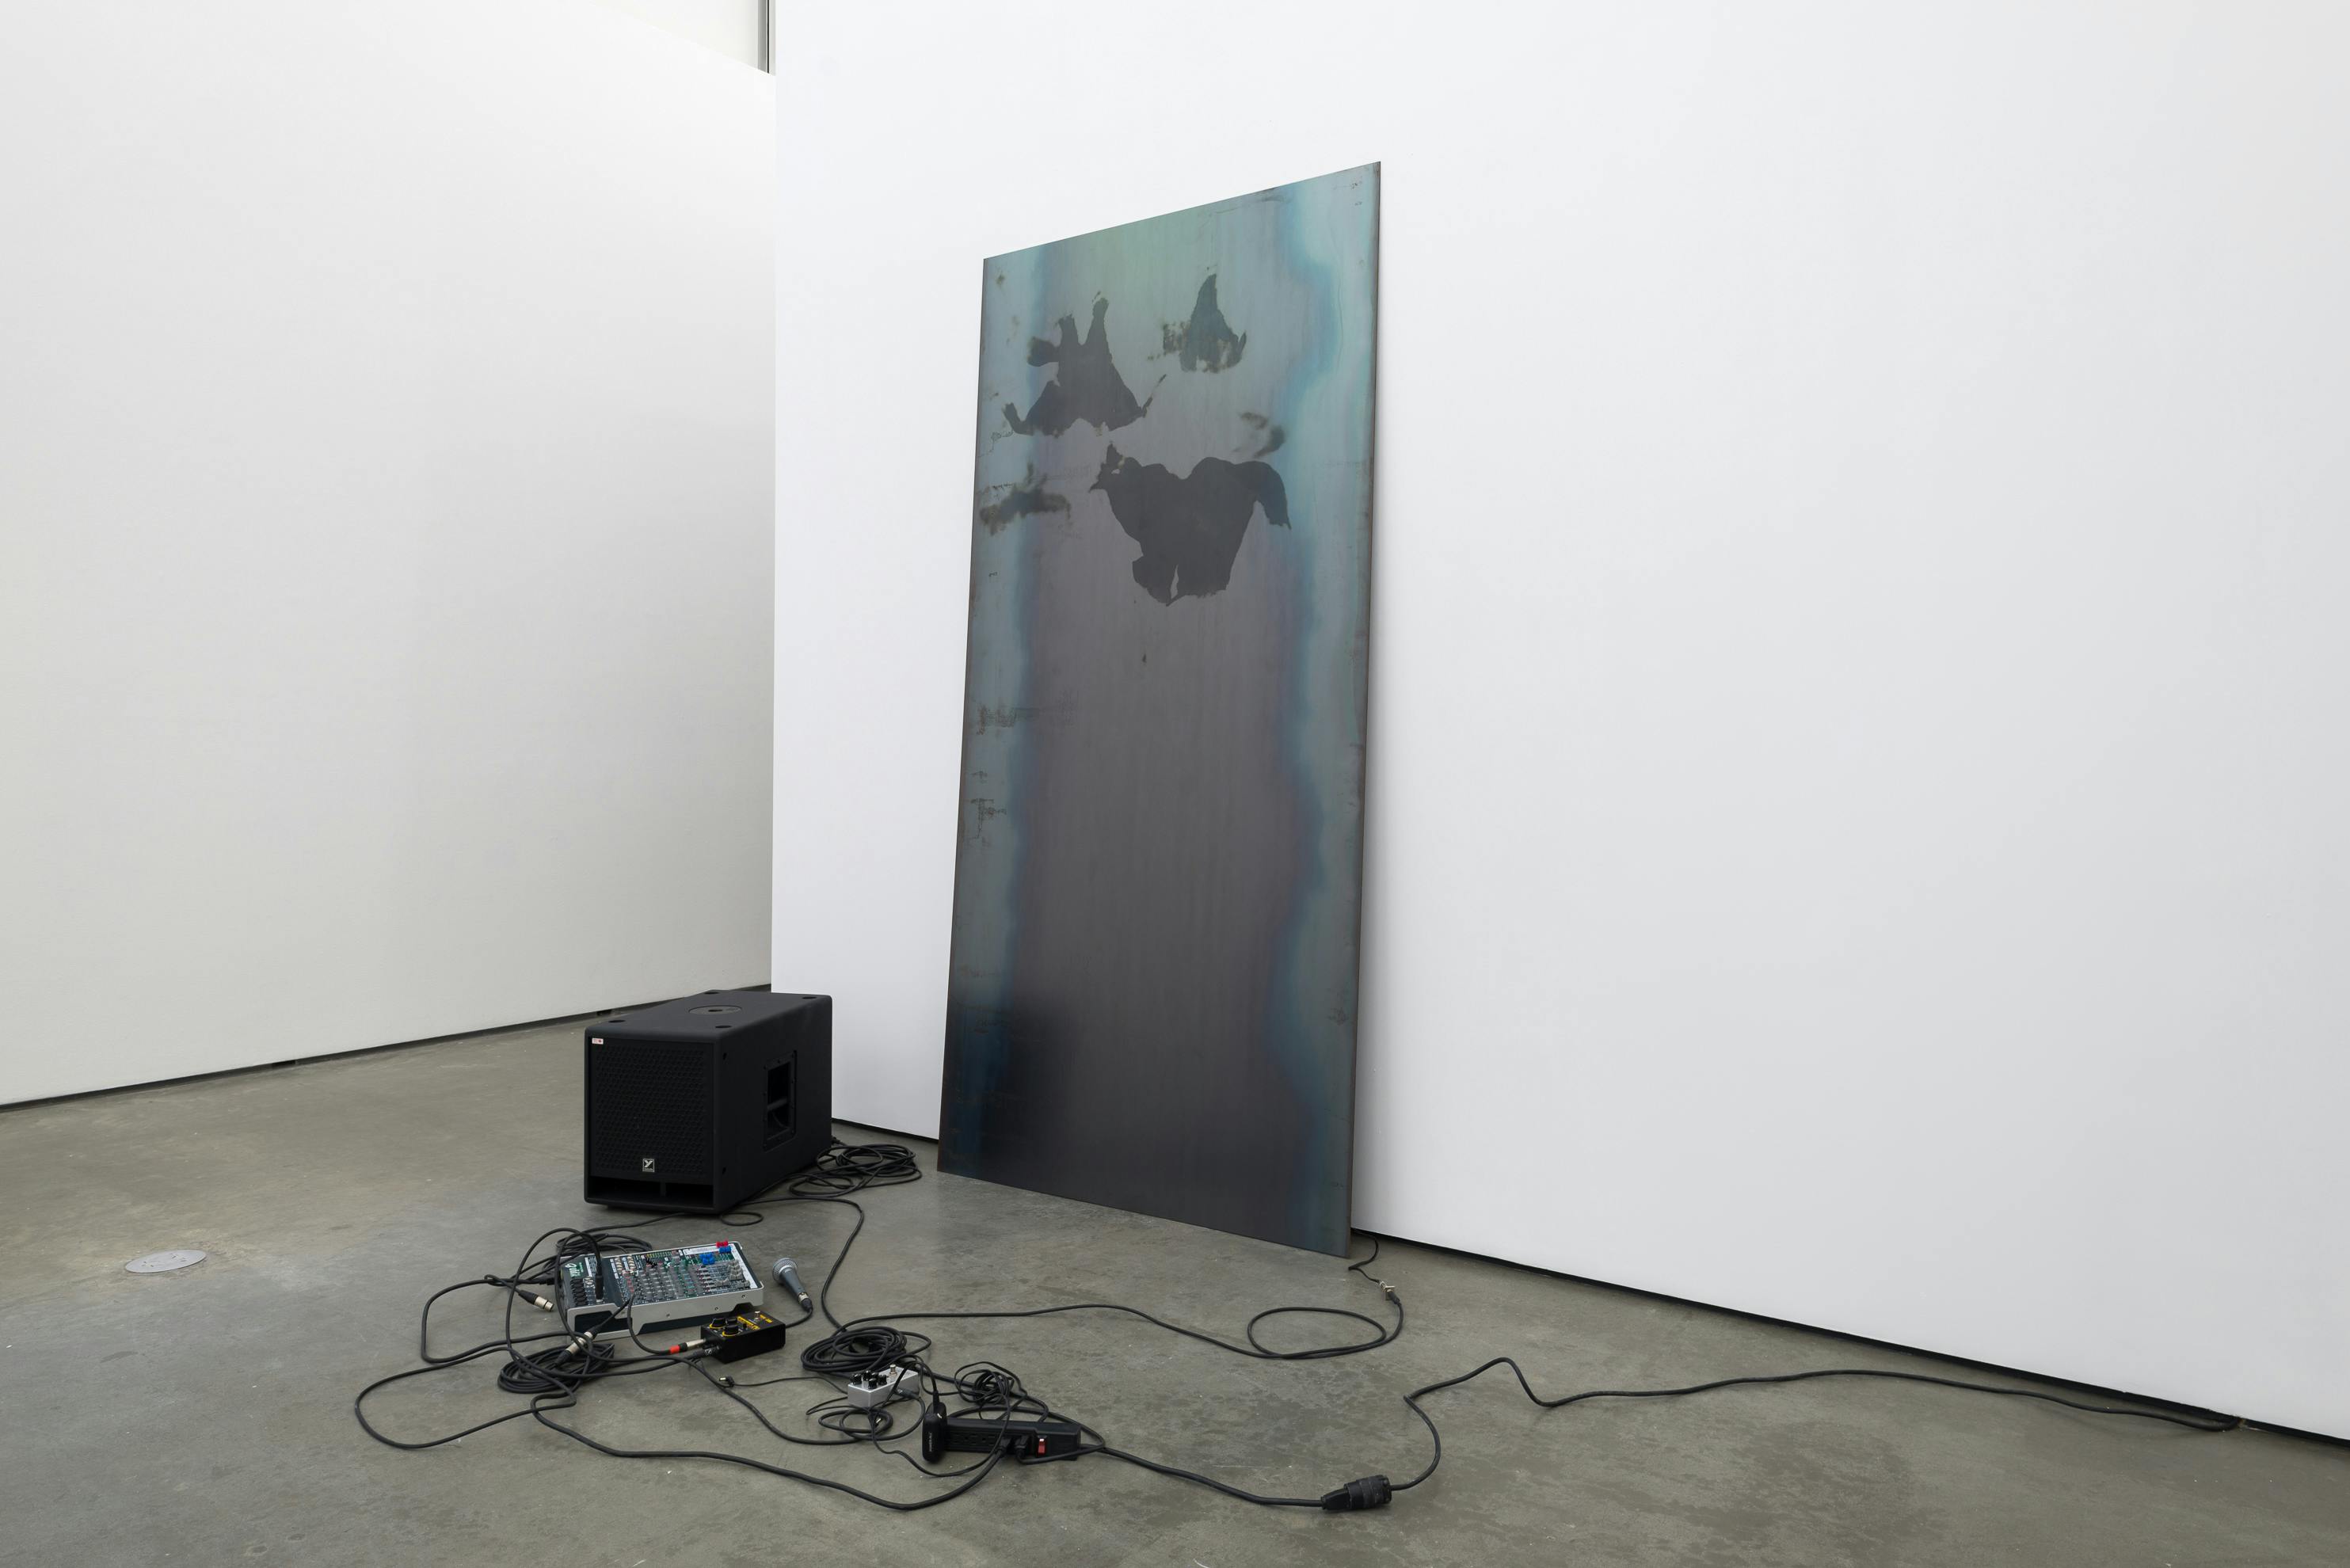 One large rectangular steel sheet leans against a wall of a gallery space. The sheet is marked with grease prints. On the floor surrounding the sheet, a microphone, speaker, mixer and patch cords sit.